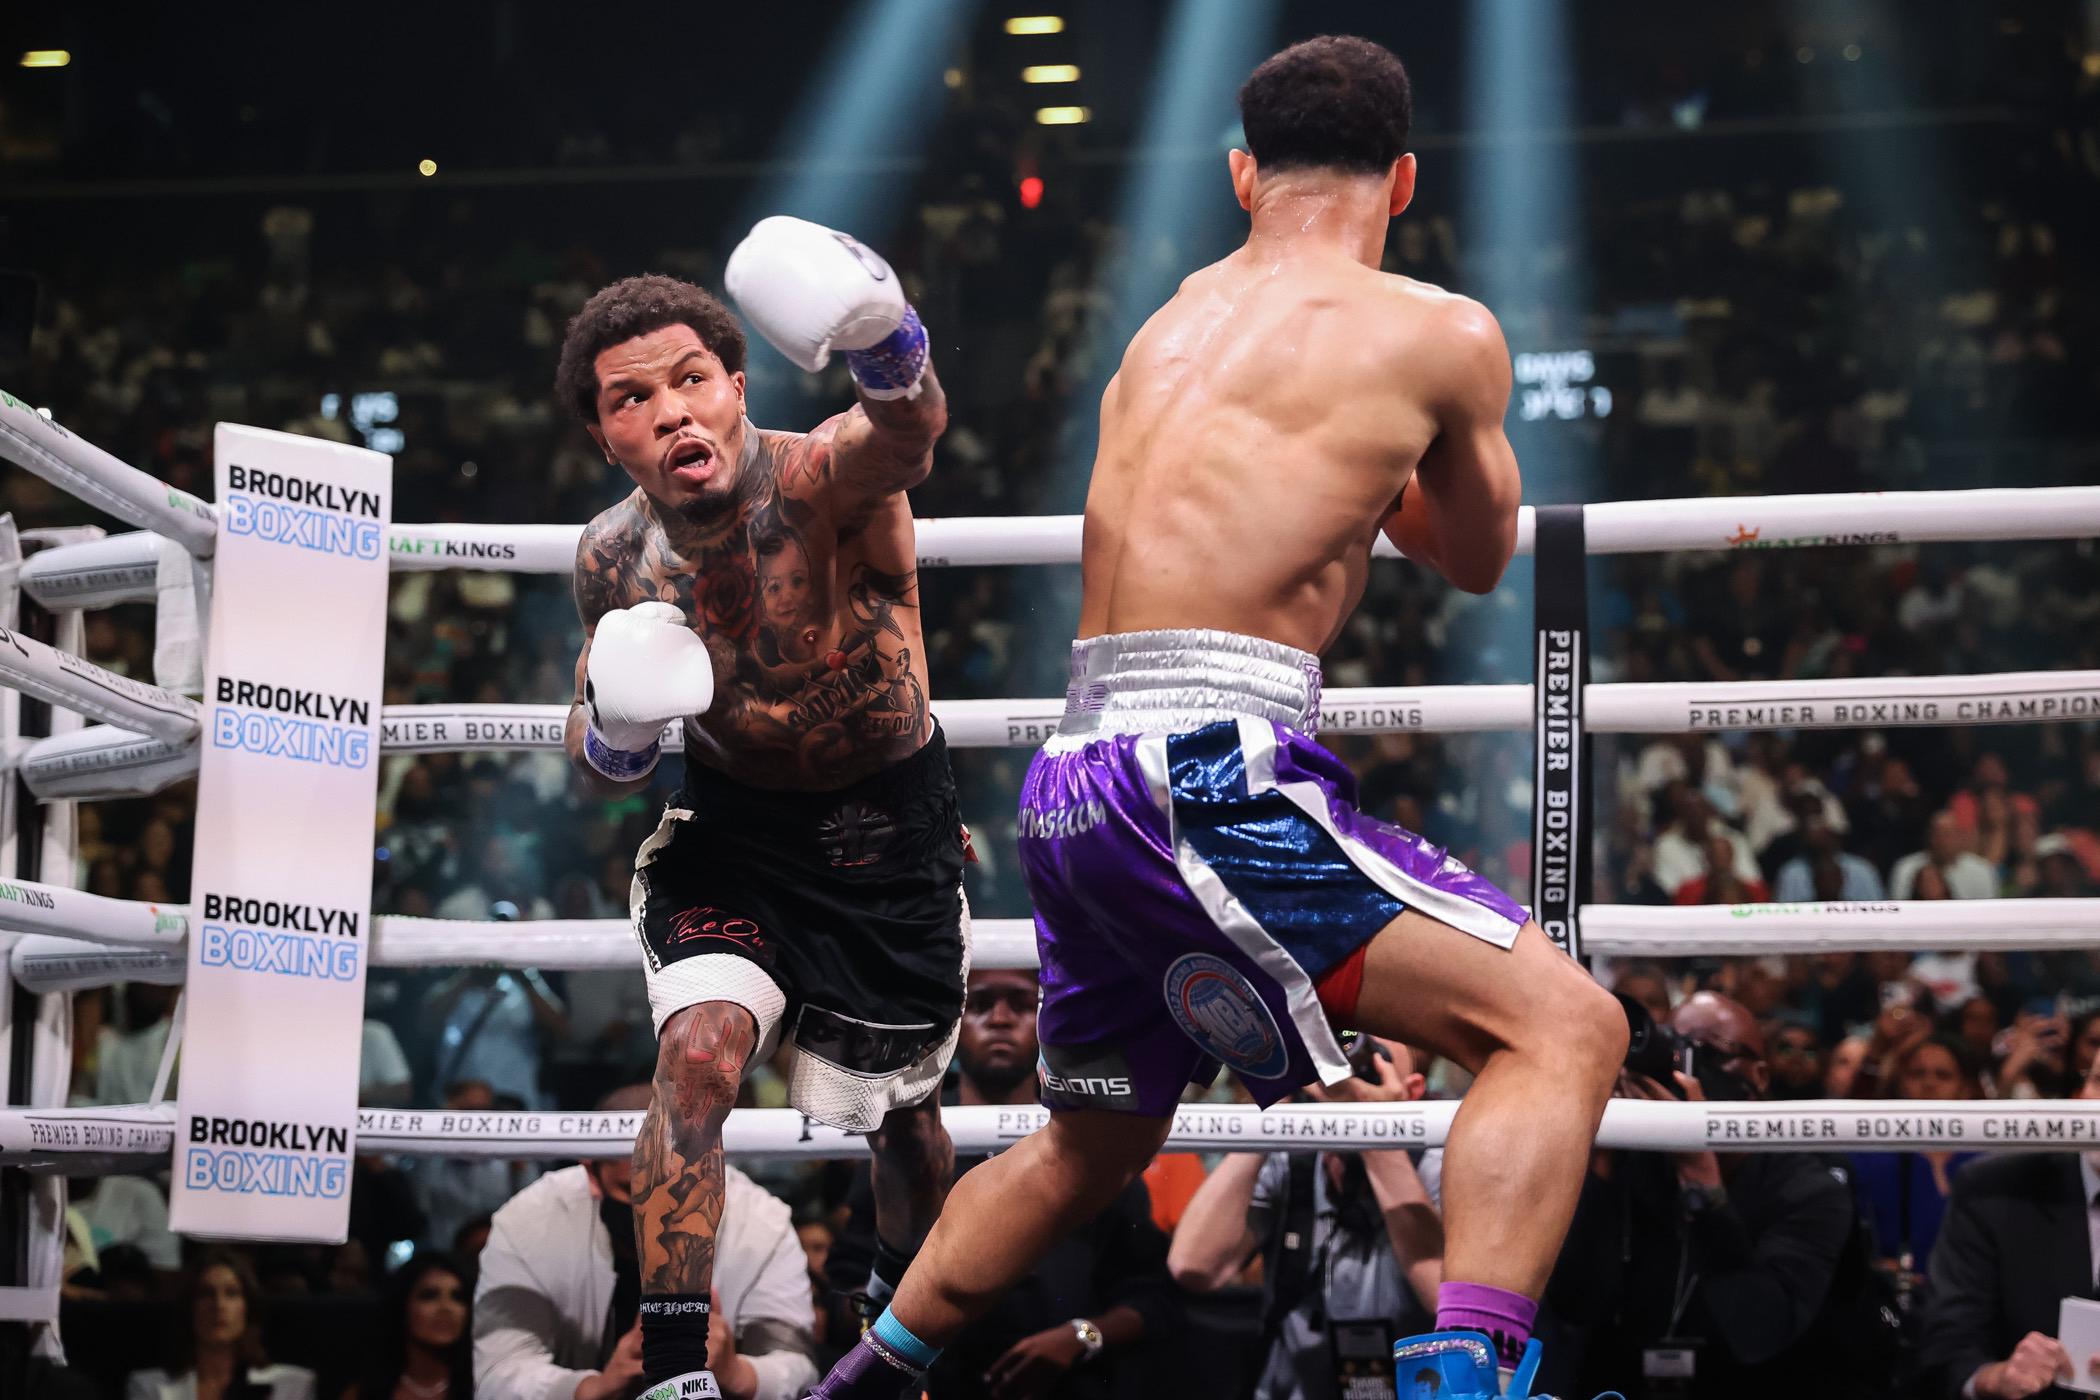 Gervonta Davis stops Rolly Romero with a perfect counter in Round 6